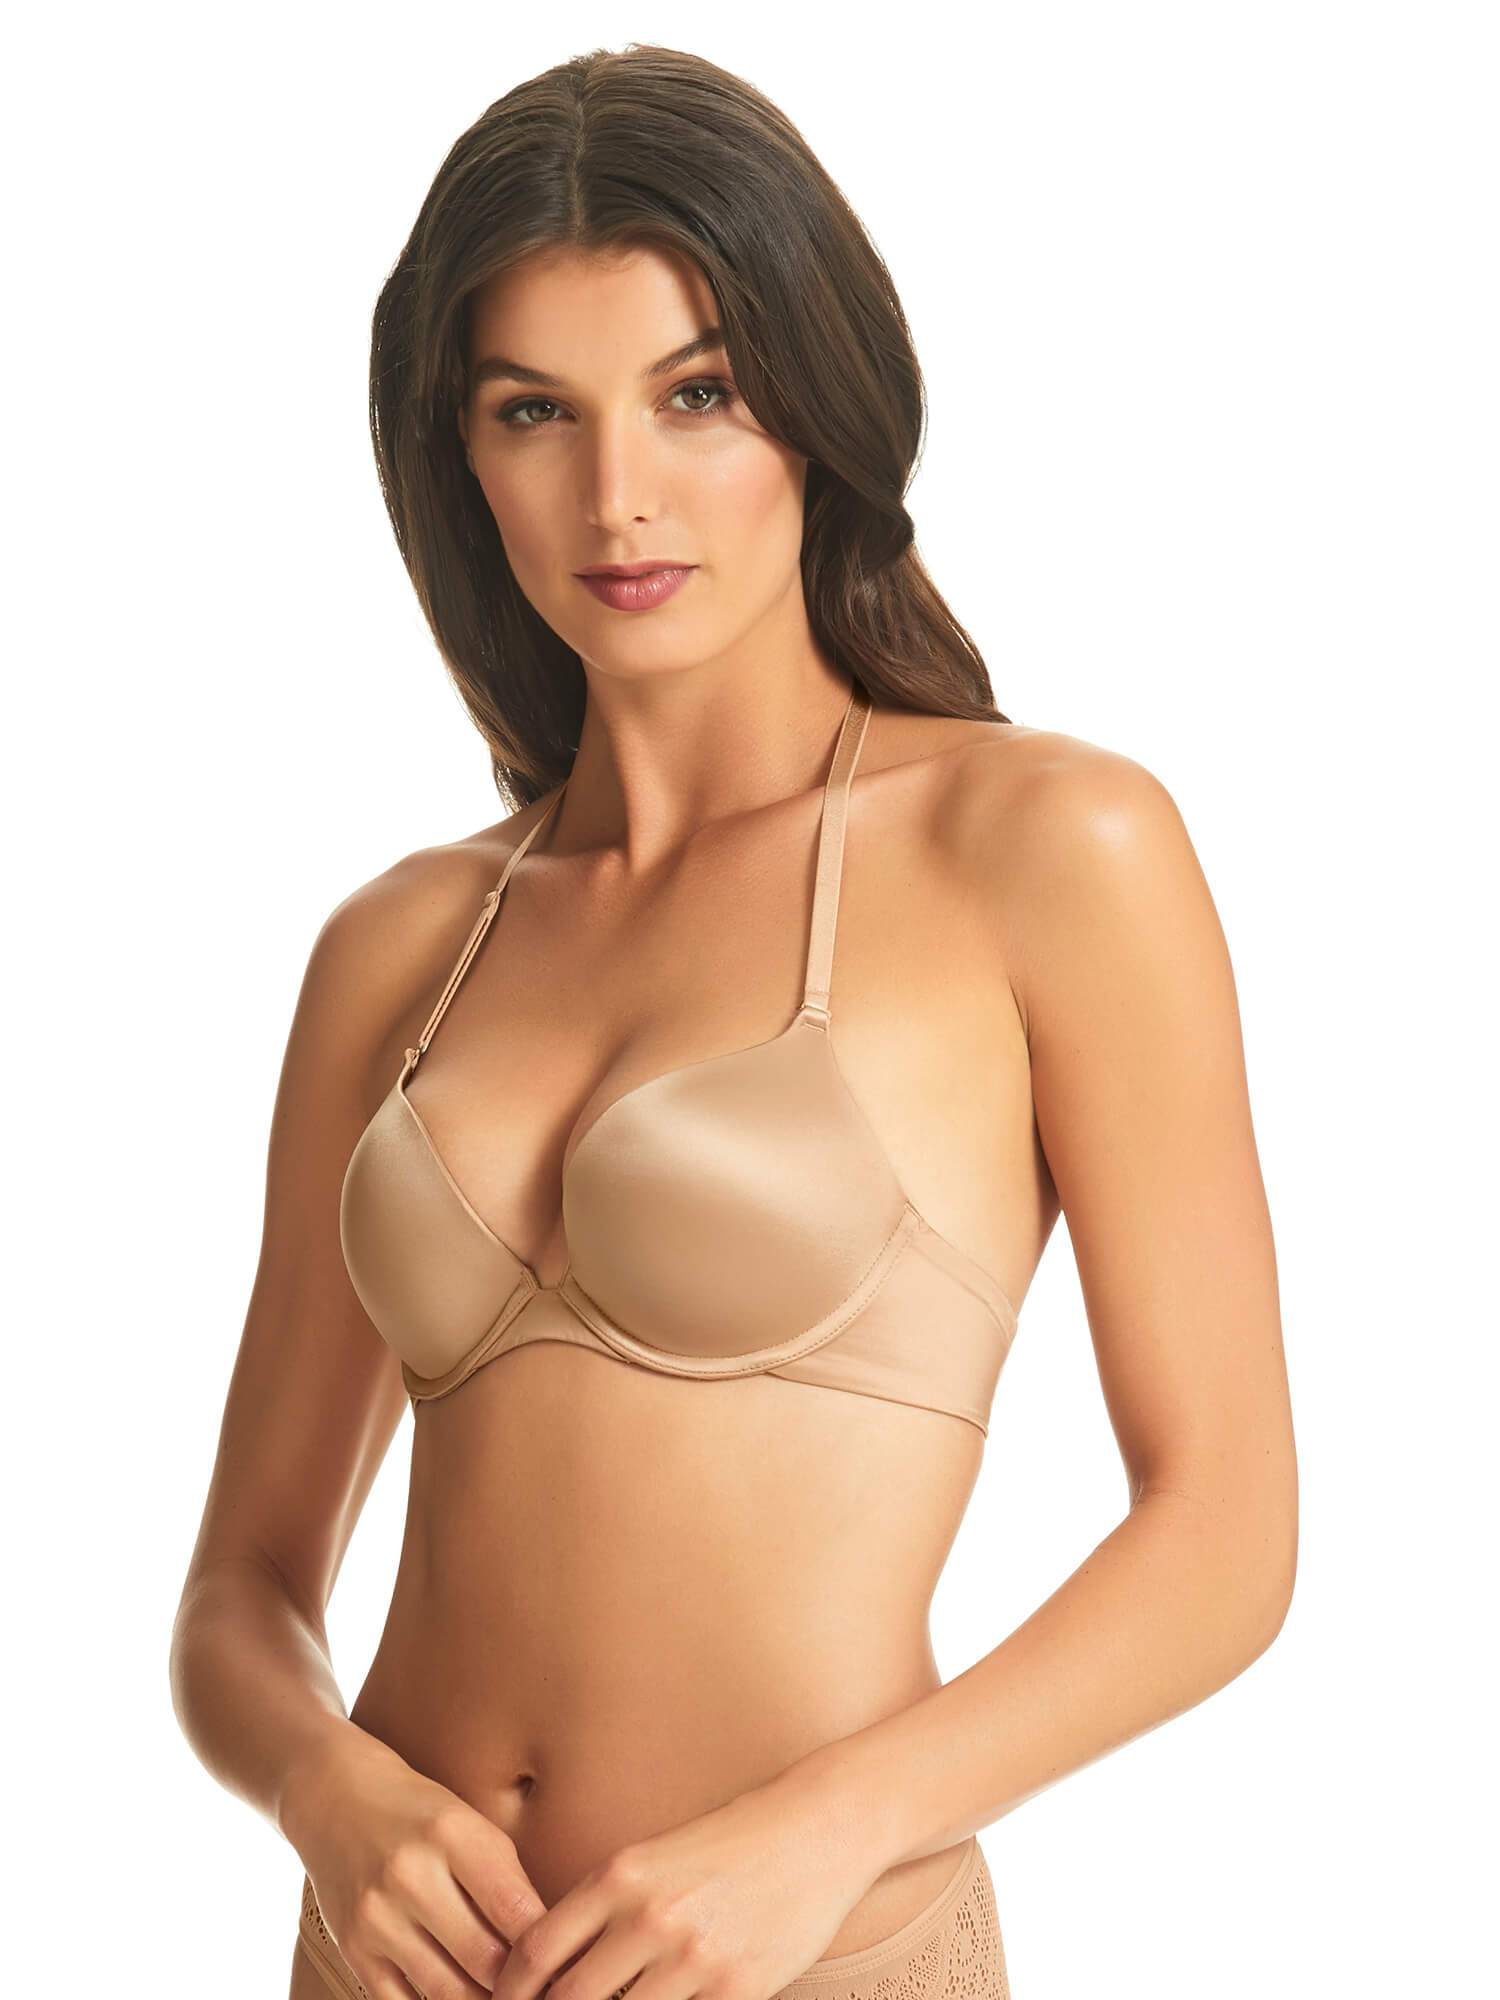 Nude Bra Cup with a Strap - Size 32B - Bra Cups - Bra Making Supplies -  Notions